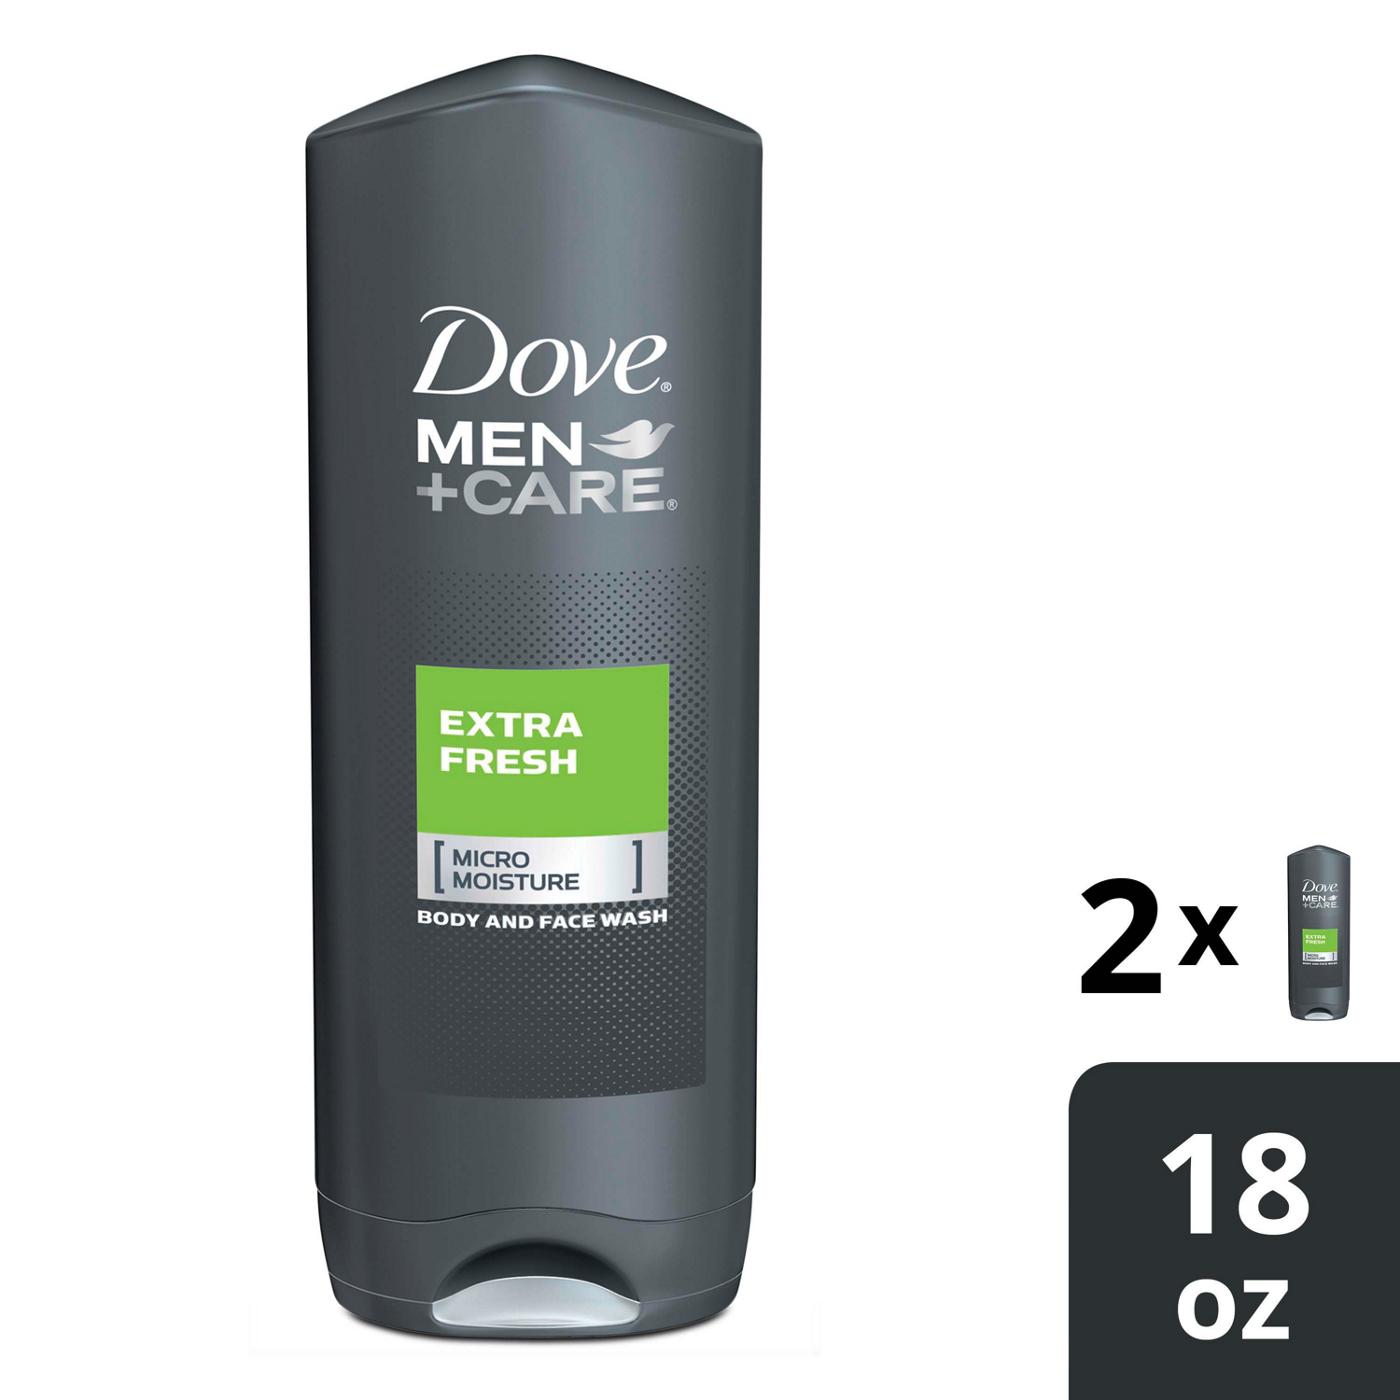 Dove Men+Care Refreshing Body + Face Wash Twin Pack - Extra Fresh; image 2 of 3